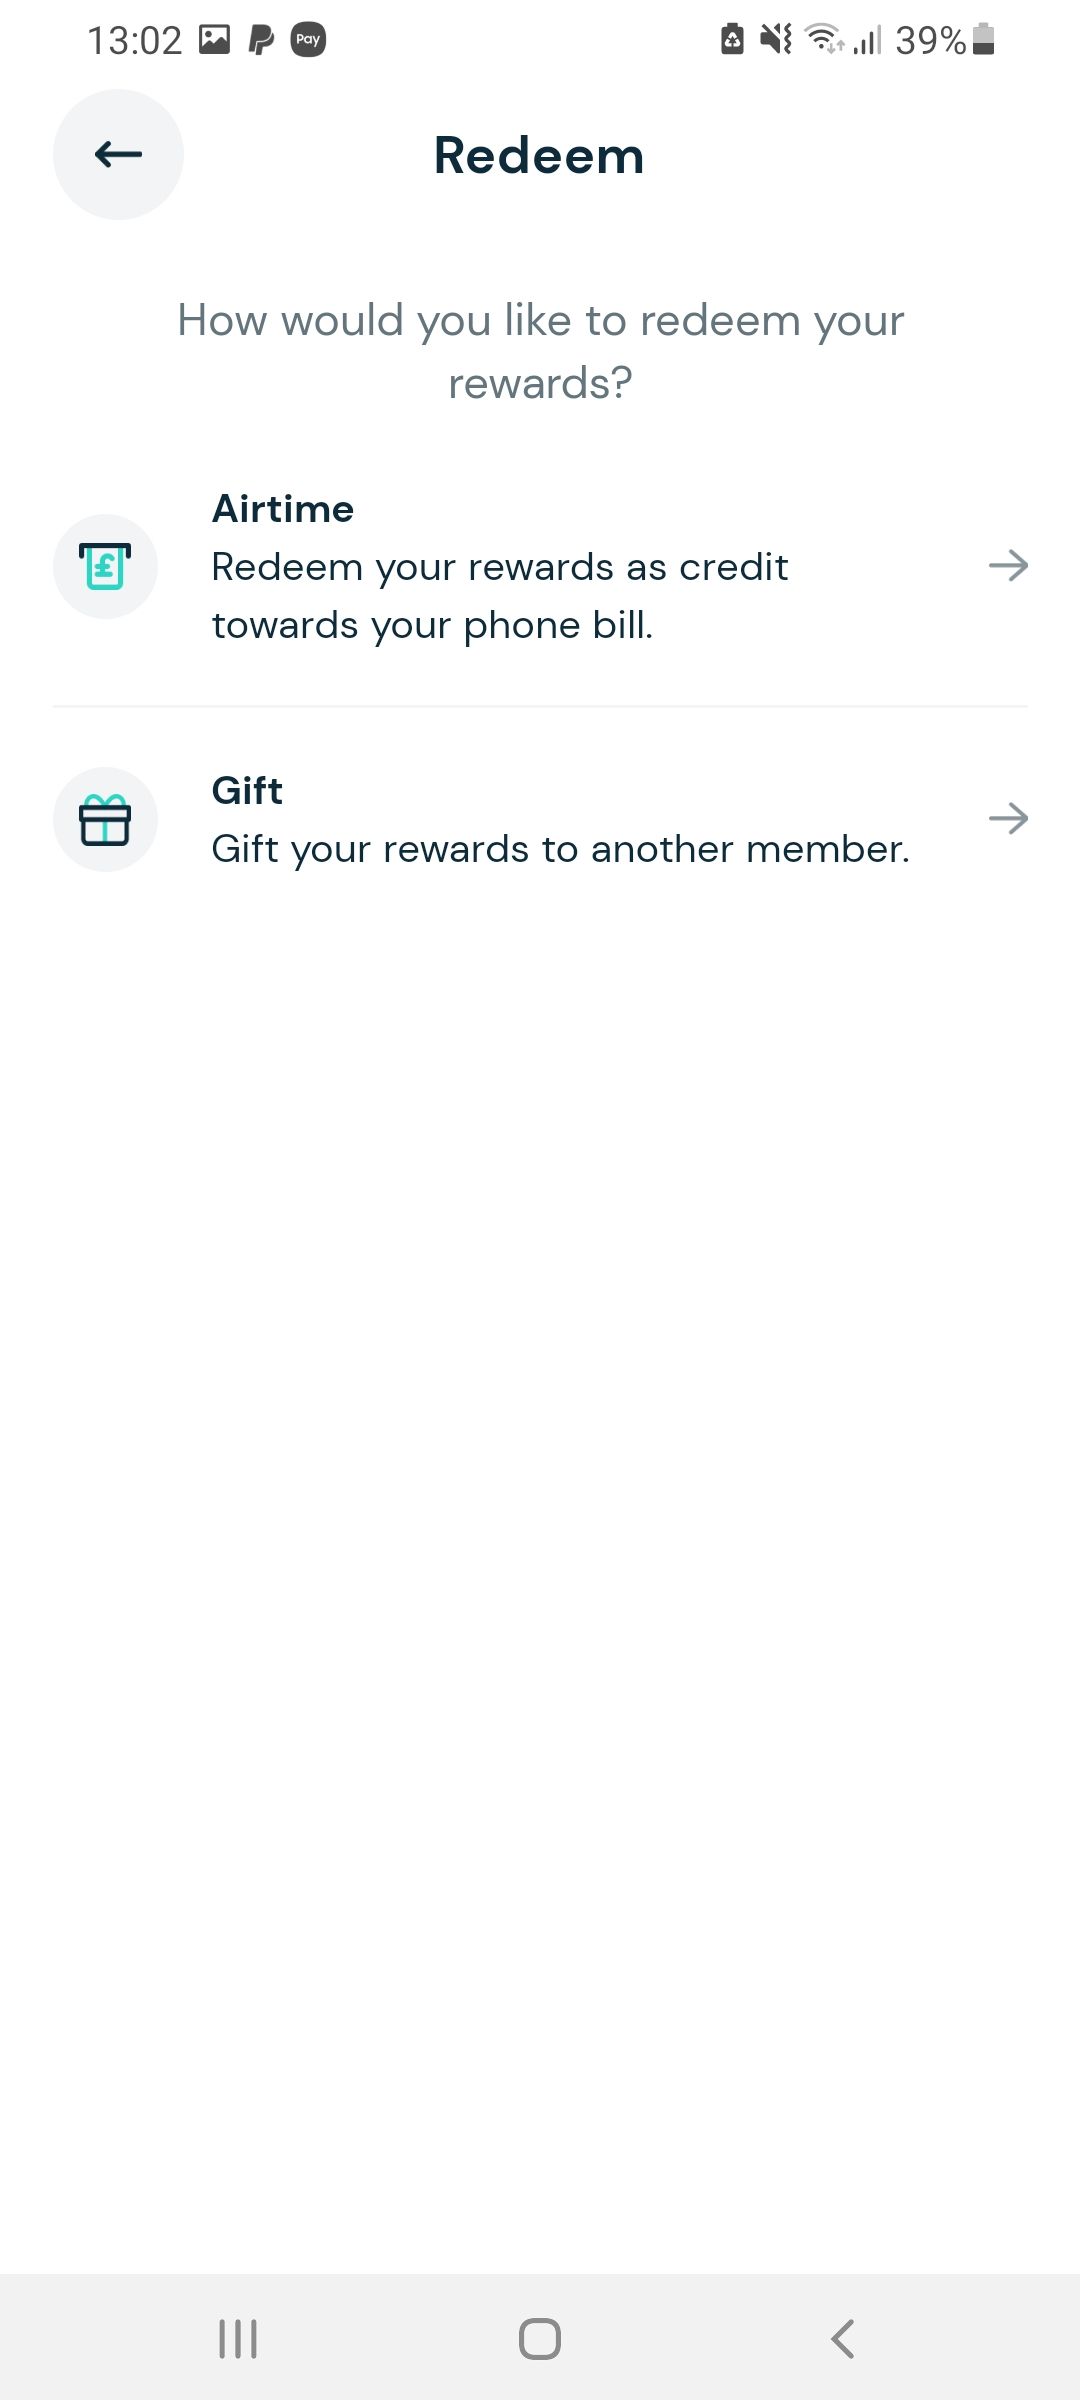 redeem rewards in airtime rewards of give to a friend